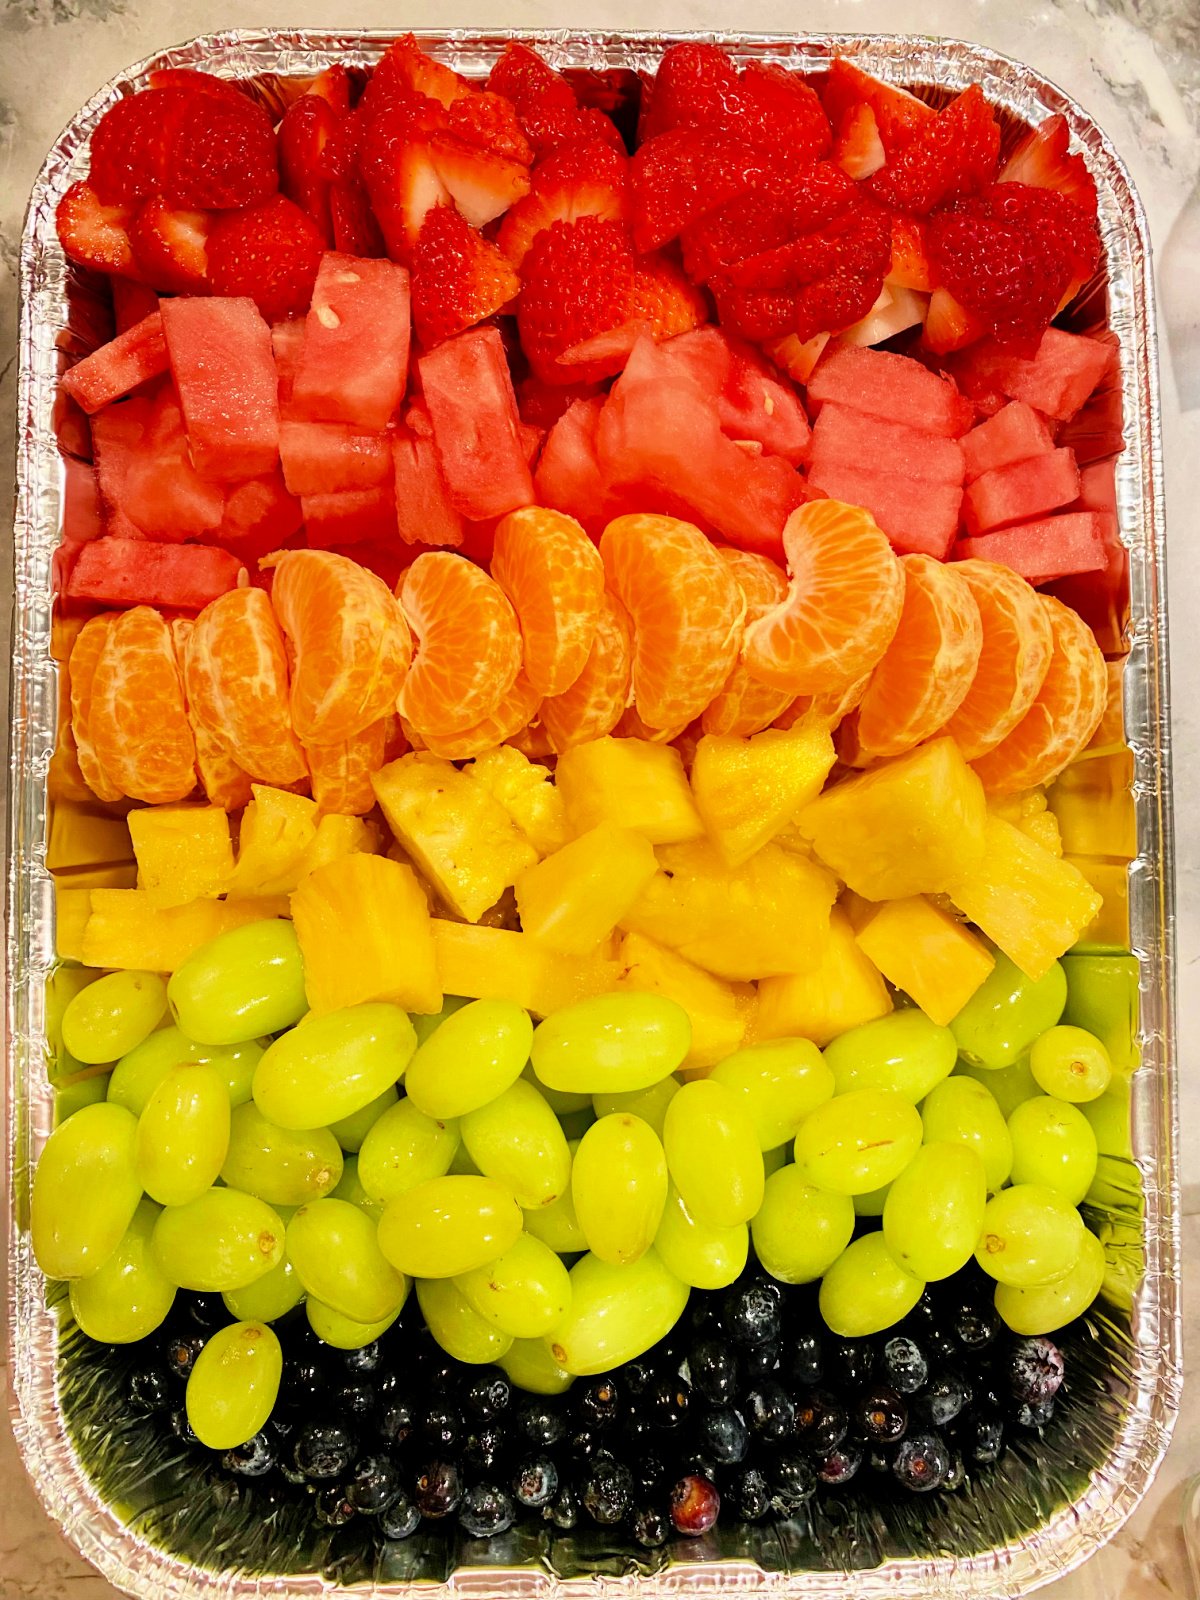 Rainbow fruit tray with strawberry, watermellon, oranges, pineapple, green grapes, and bueberries.